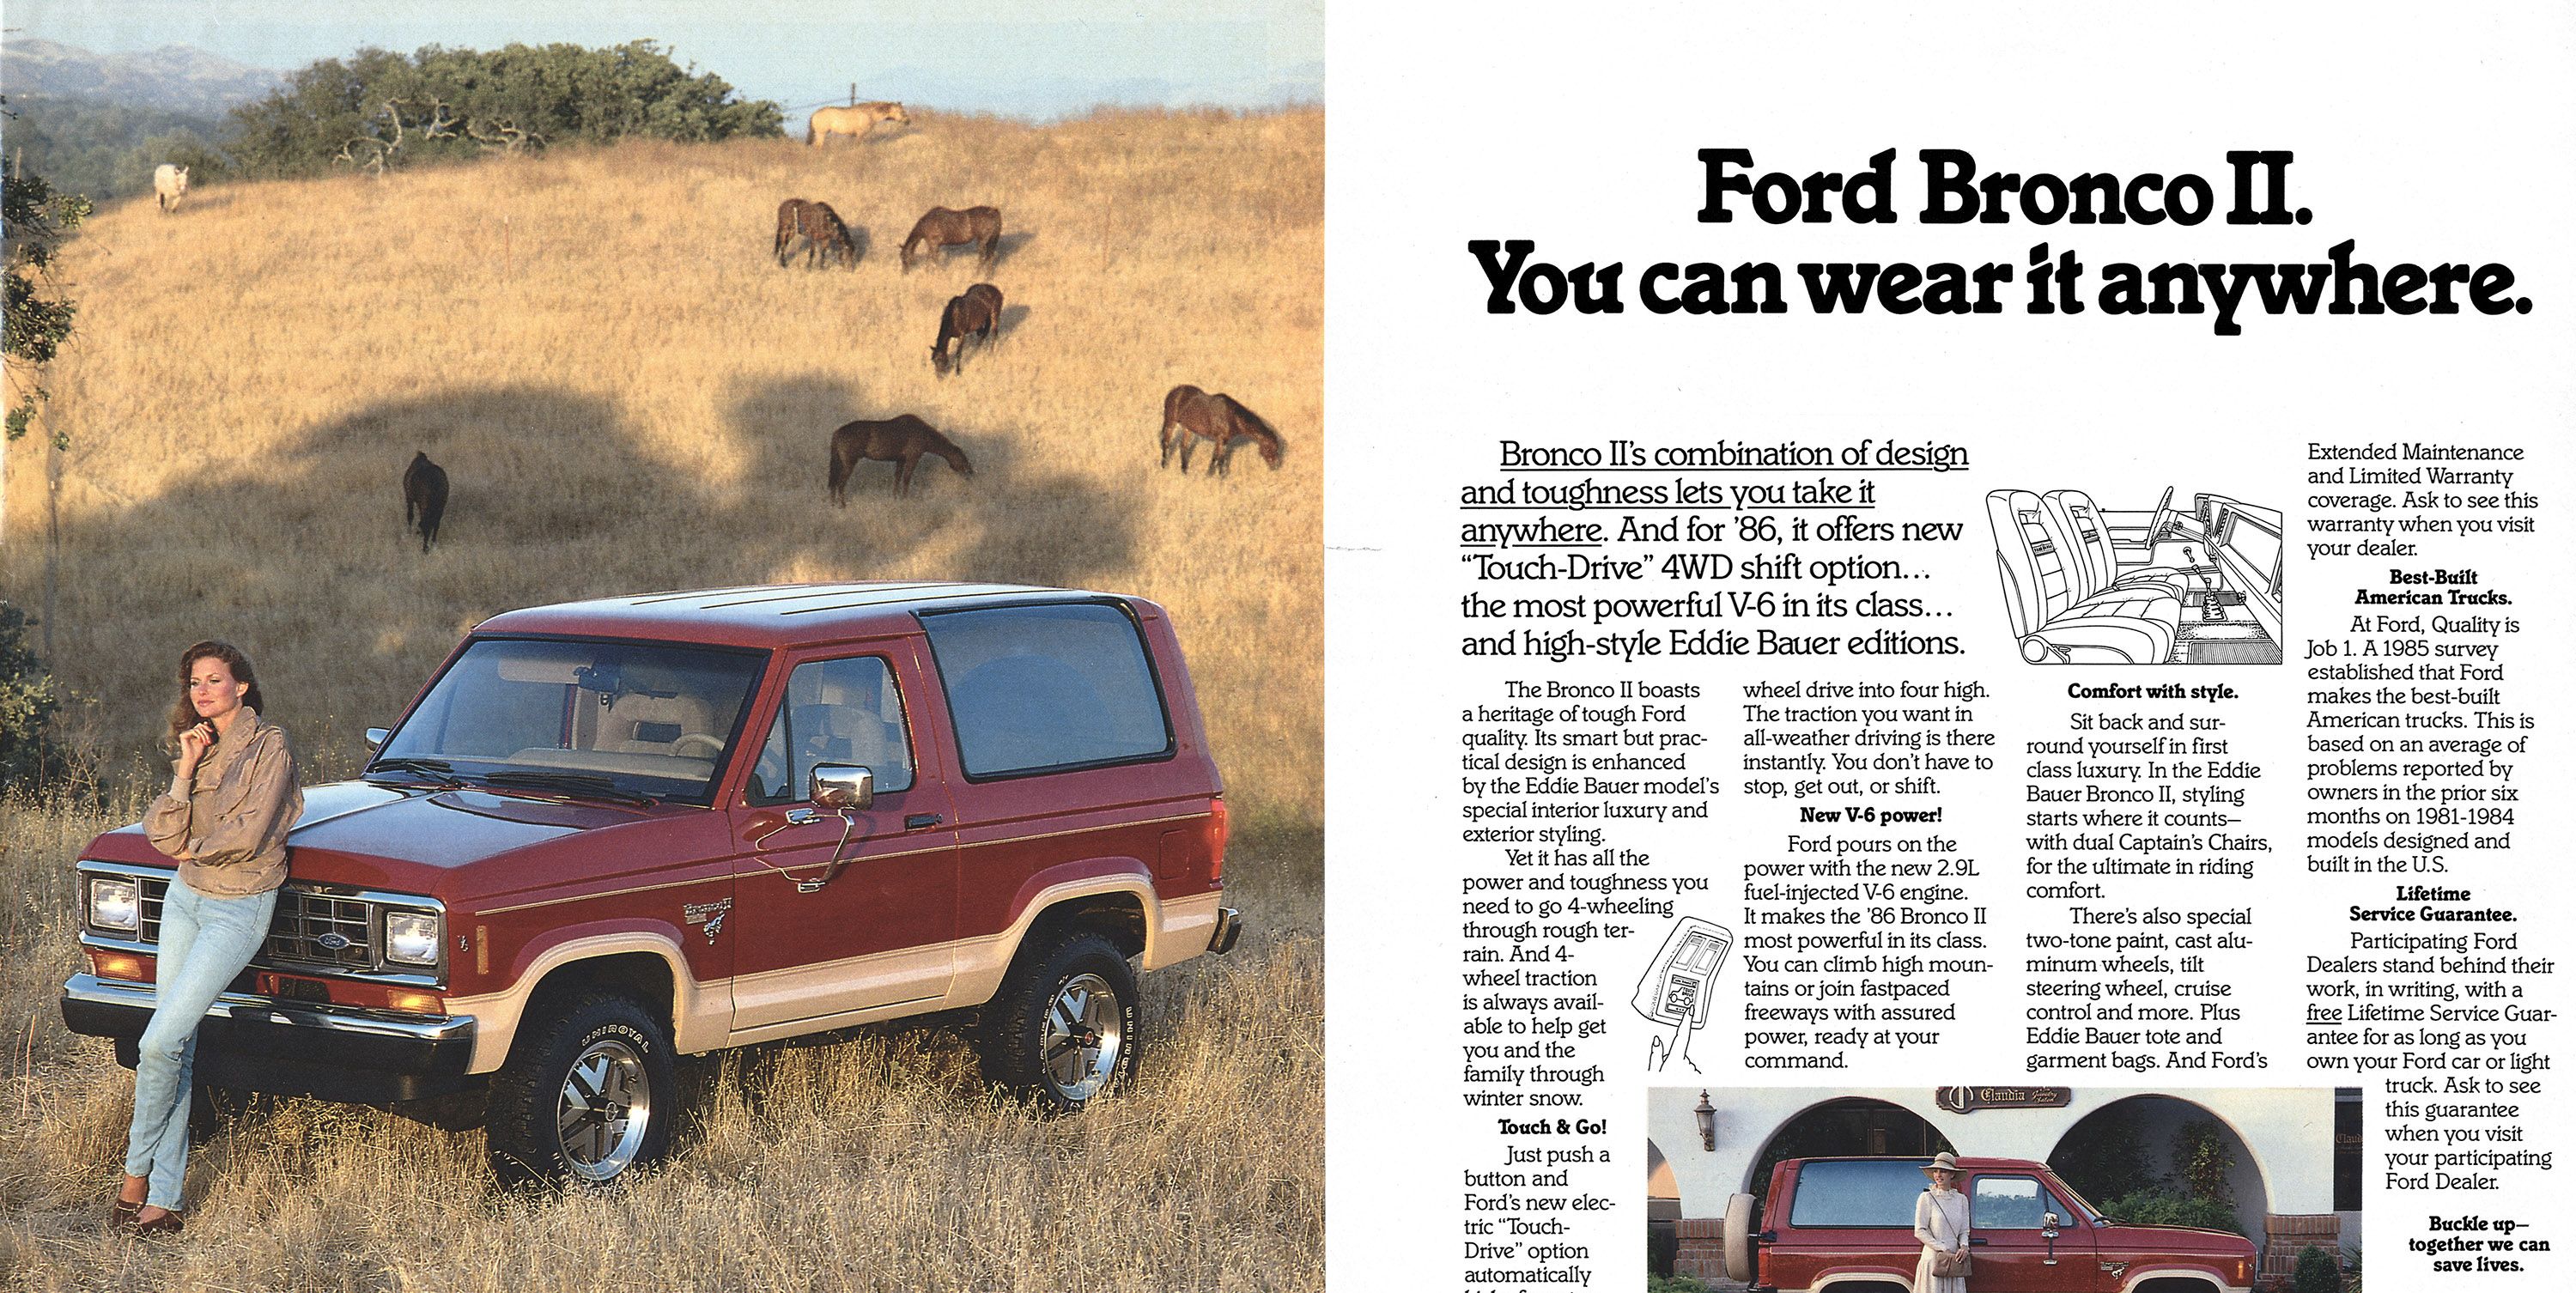 You Can Wear the 1986 Ford Bronco II SUV Anywhere